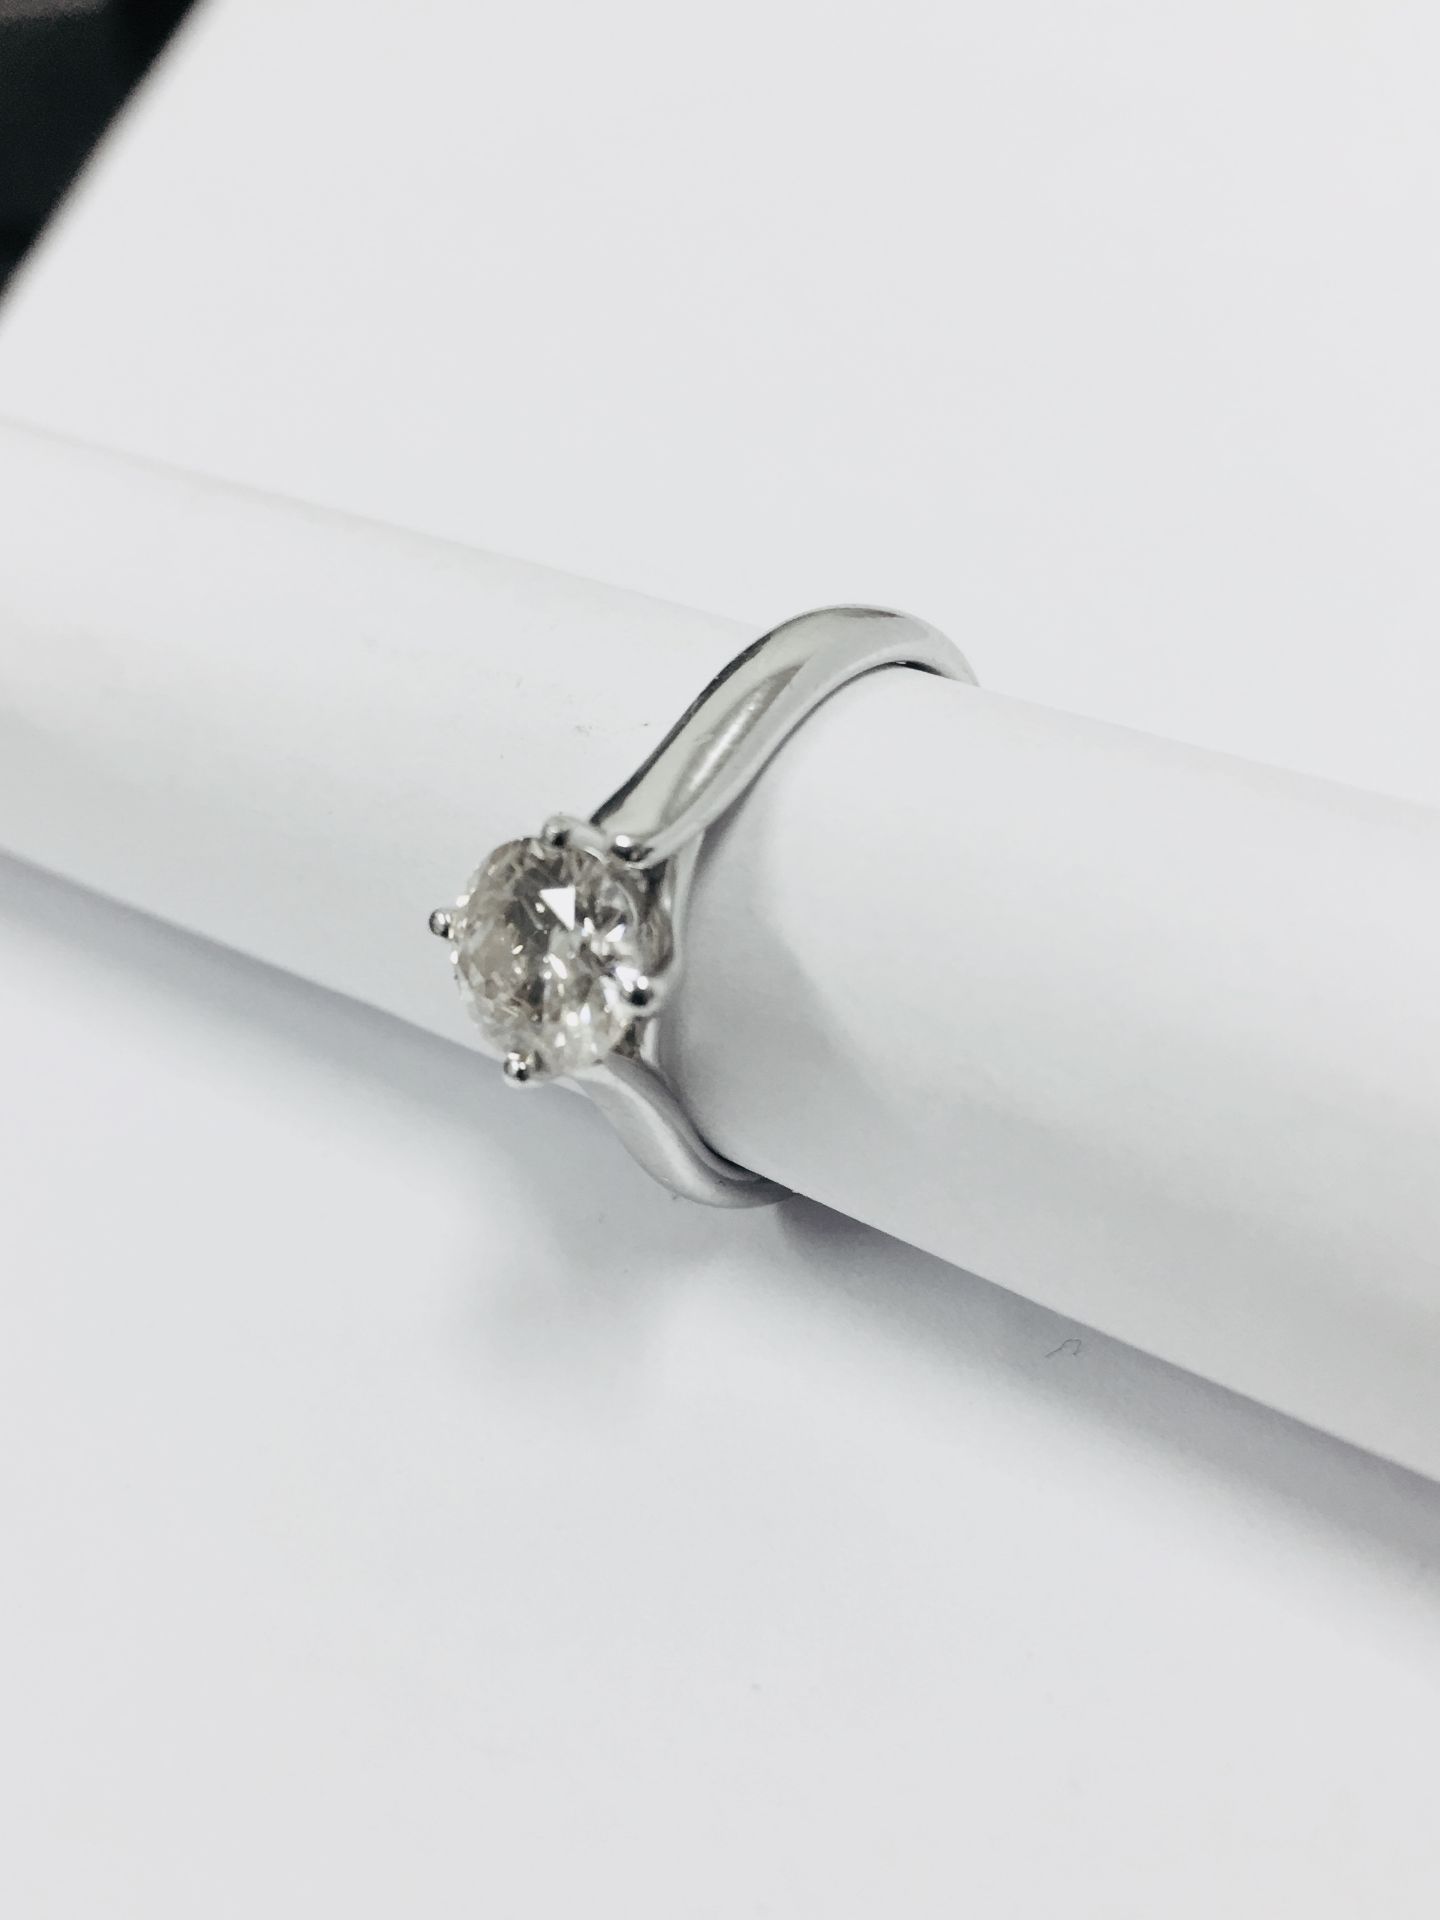 1.09ct diamond solitaire ring set in 18ct gold. Brilliant cut diamond G colour and SI2 clarity. ( - Image 6 of 6